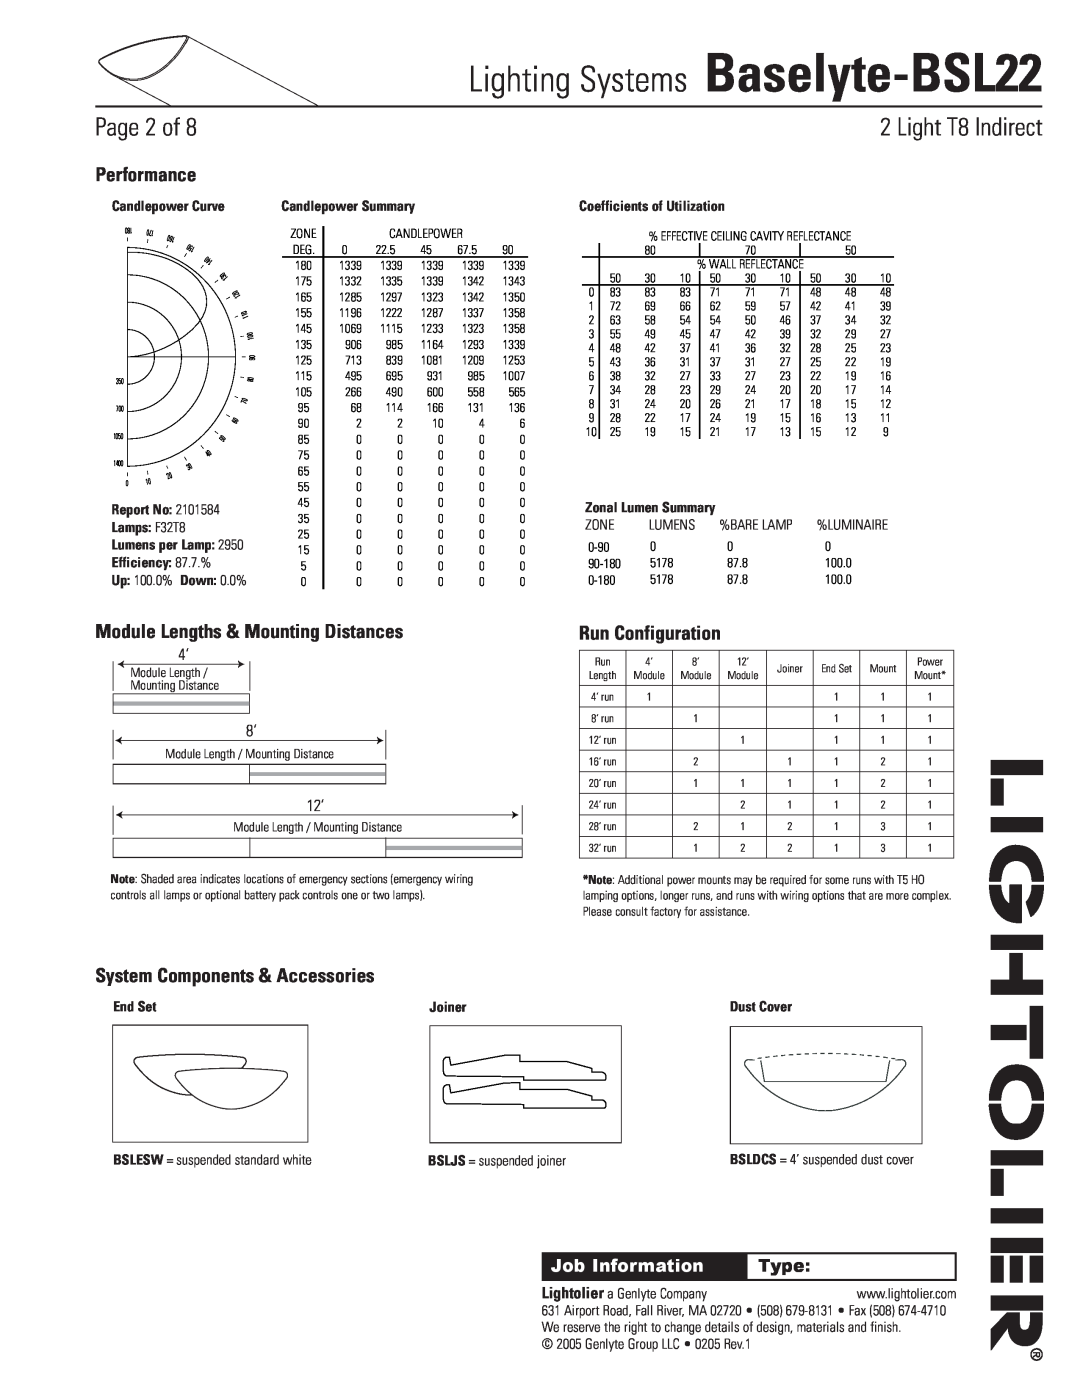 Lightolier Lighting Systems Baselyte-BSL22, Page of, Performance, Module Lengths & Mounting Distances, Type, End Set 